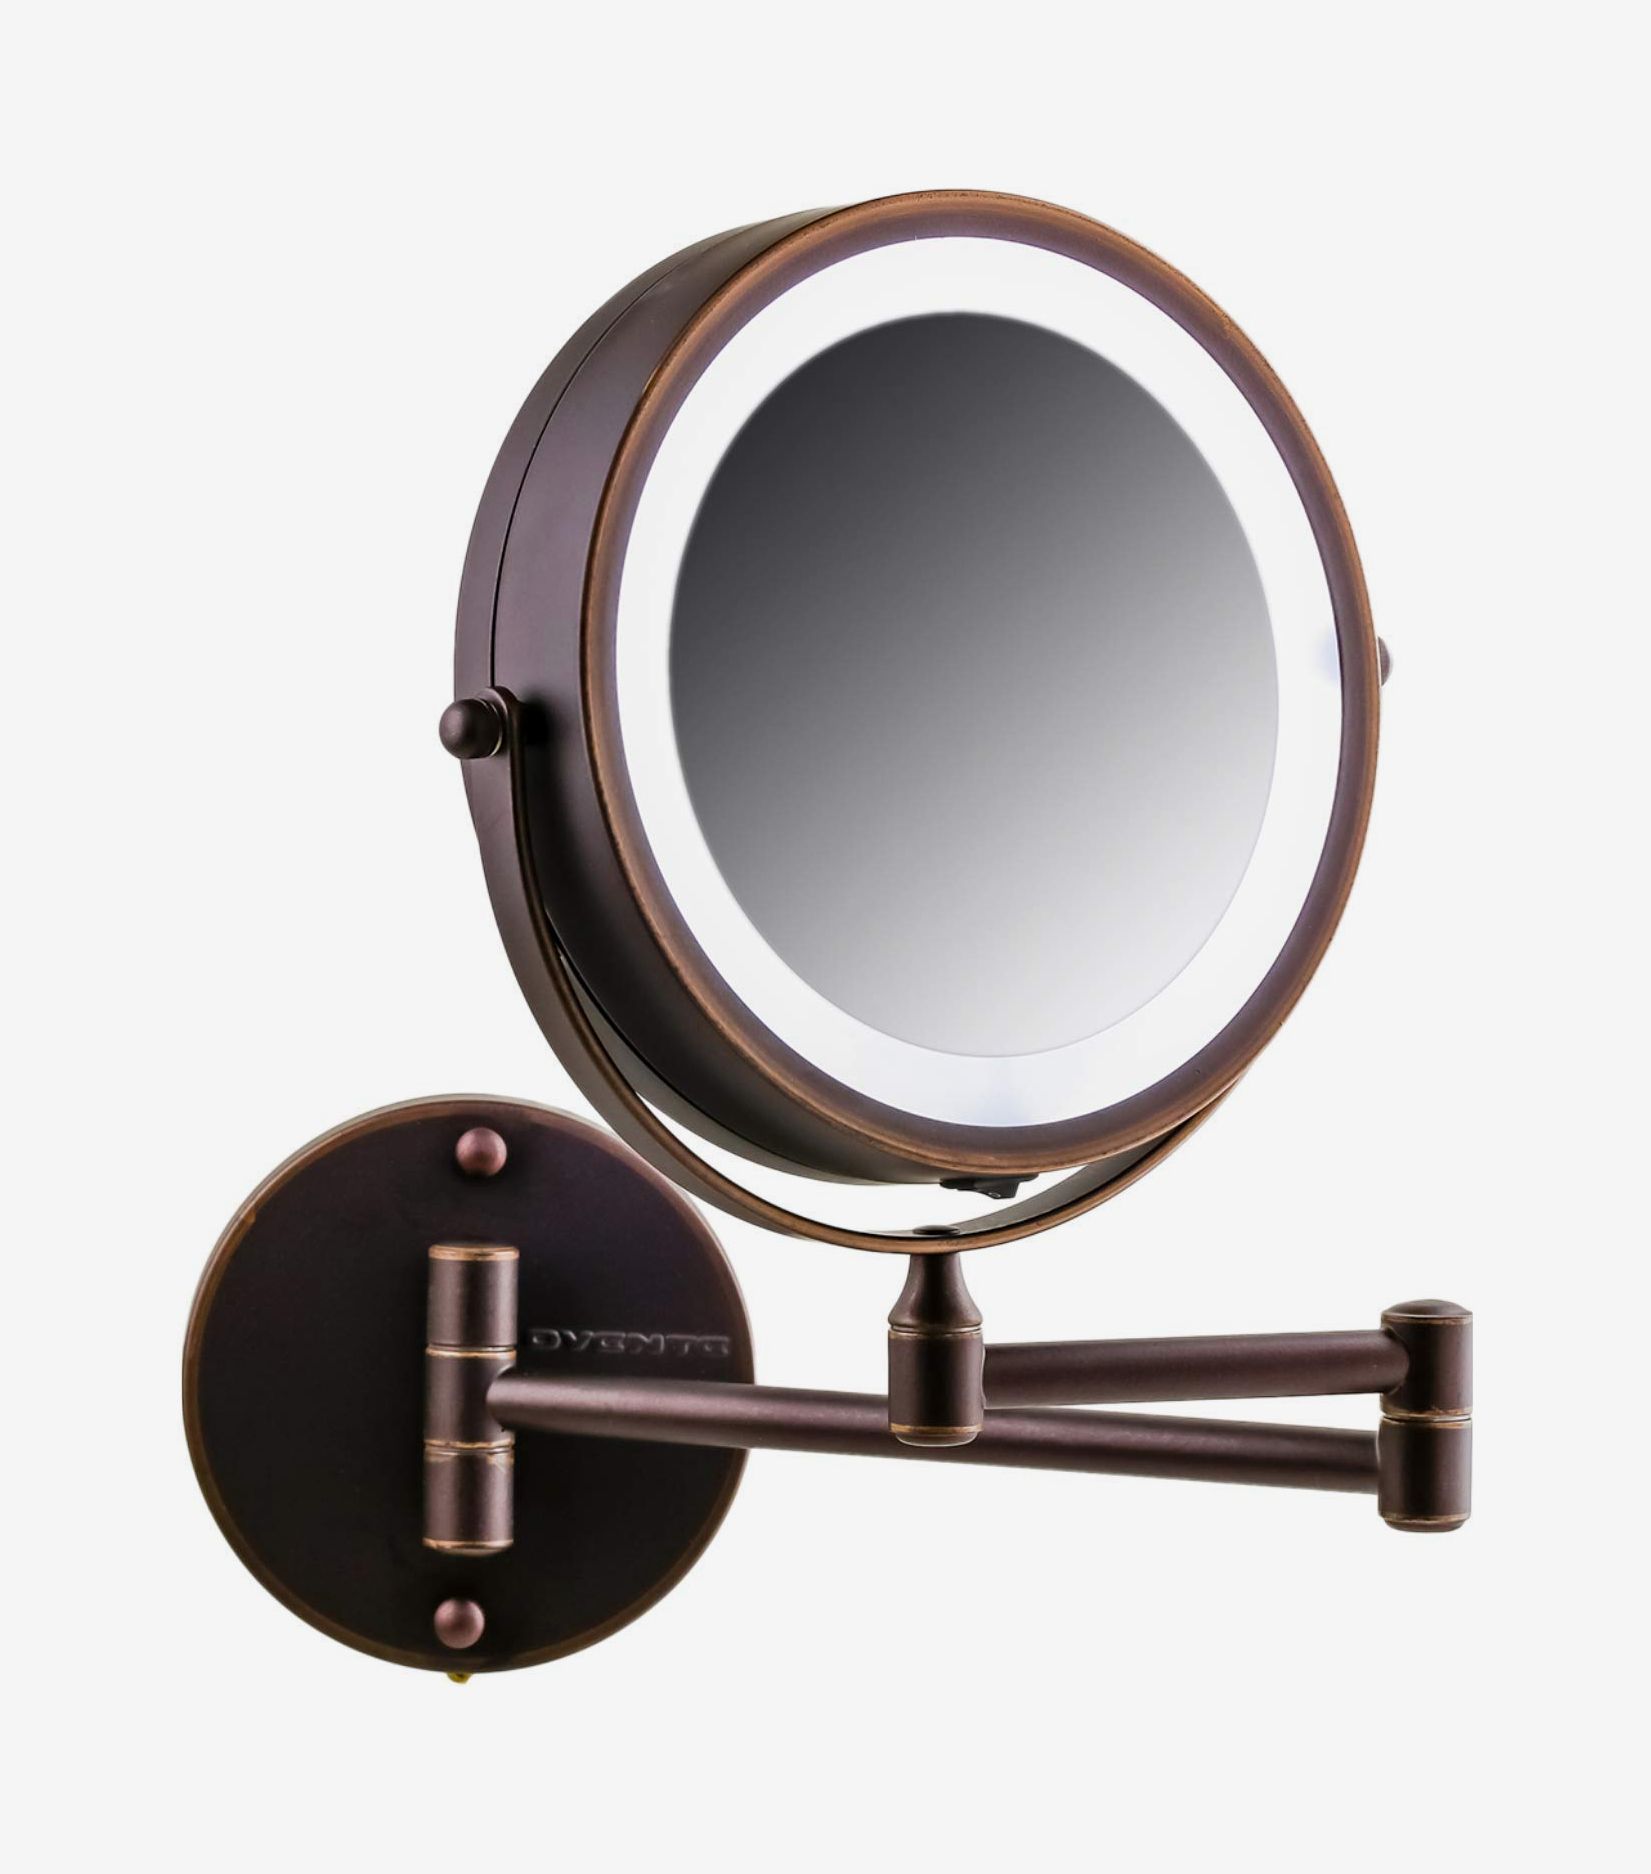 14 Best Lighted Makeup Mirrors 2022, Best Makeup Mirrors For College